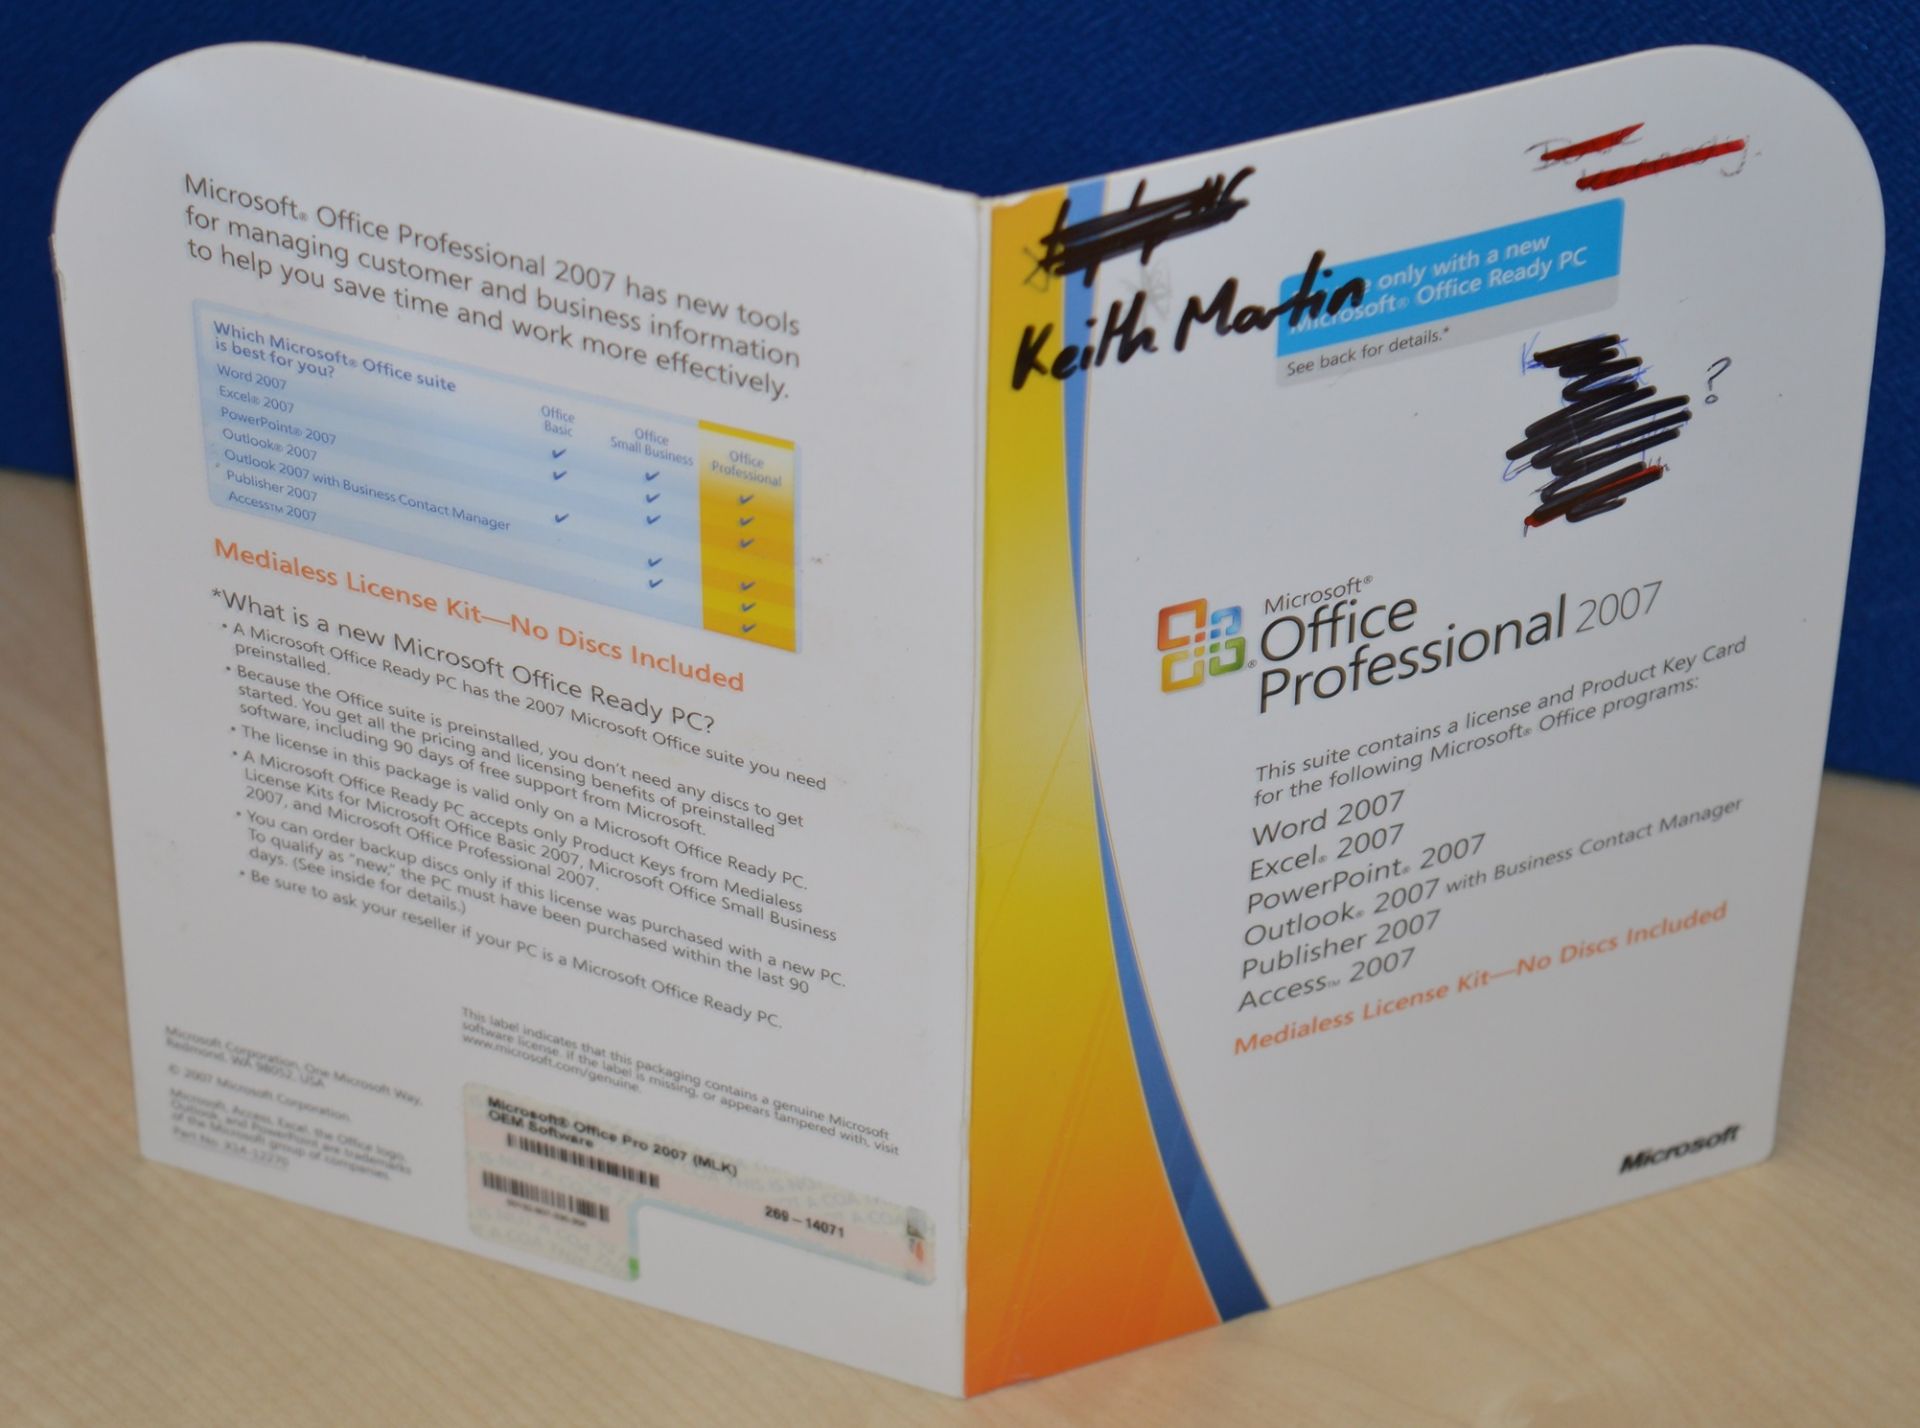 1 x Microsft Office 2007 Professional COA - Features Word, Excel, Powerpoint, Outlook Publisher - Image 2 of 3